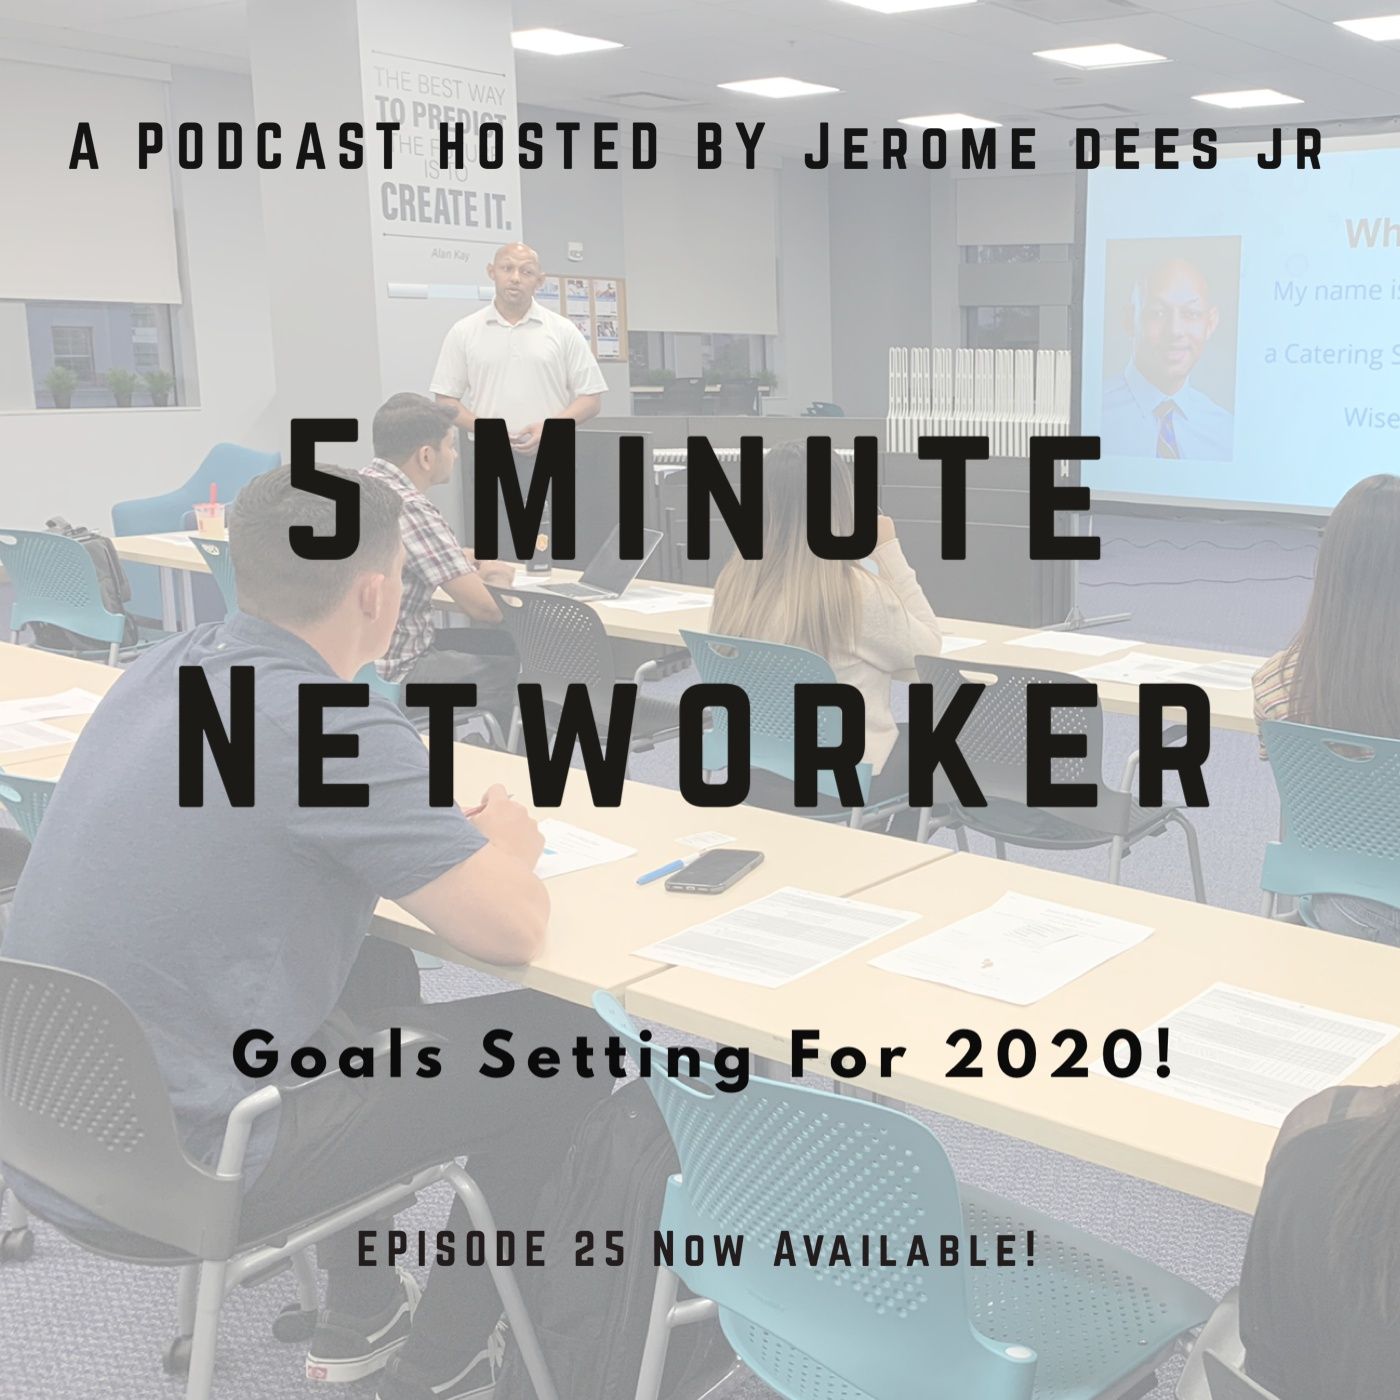 What Are Your Networking Goals For 2020!?